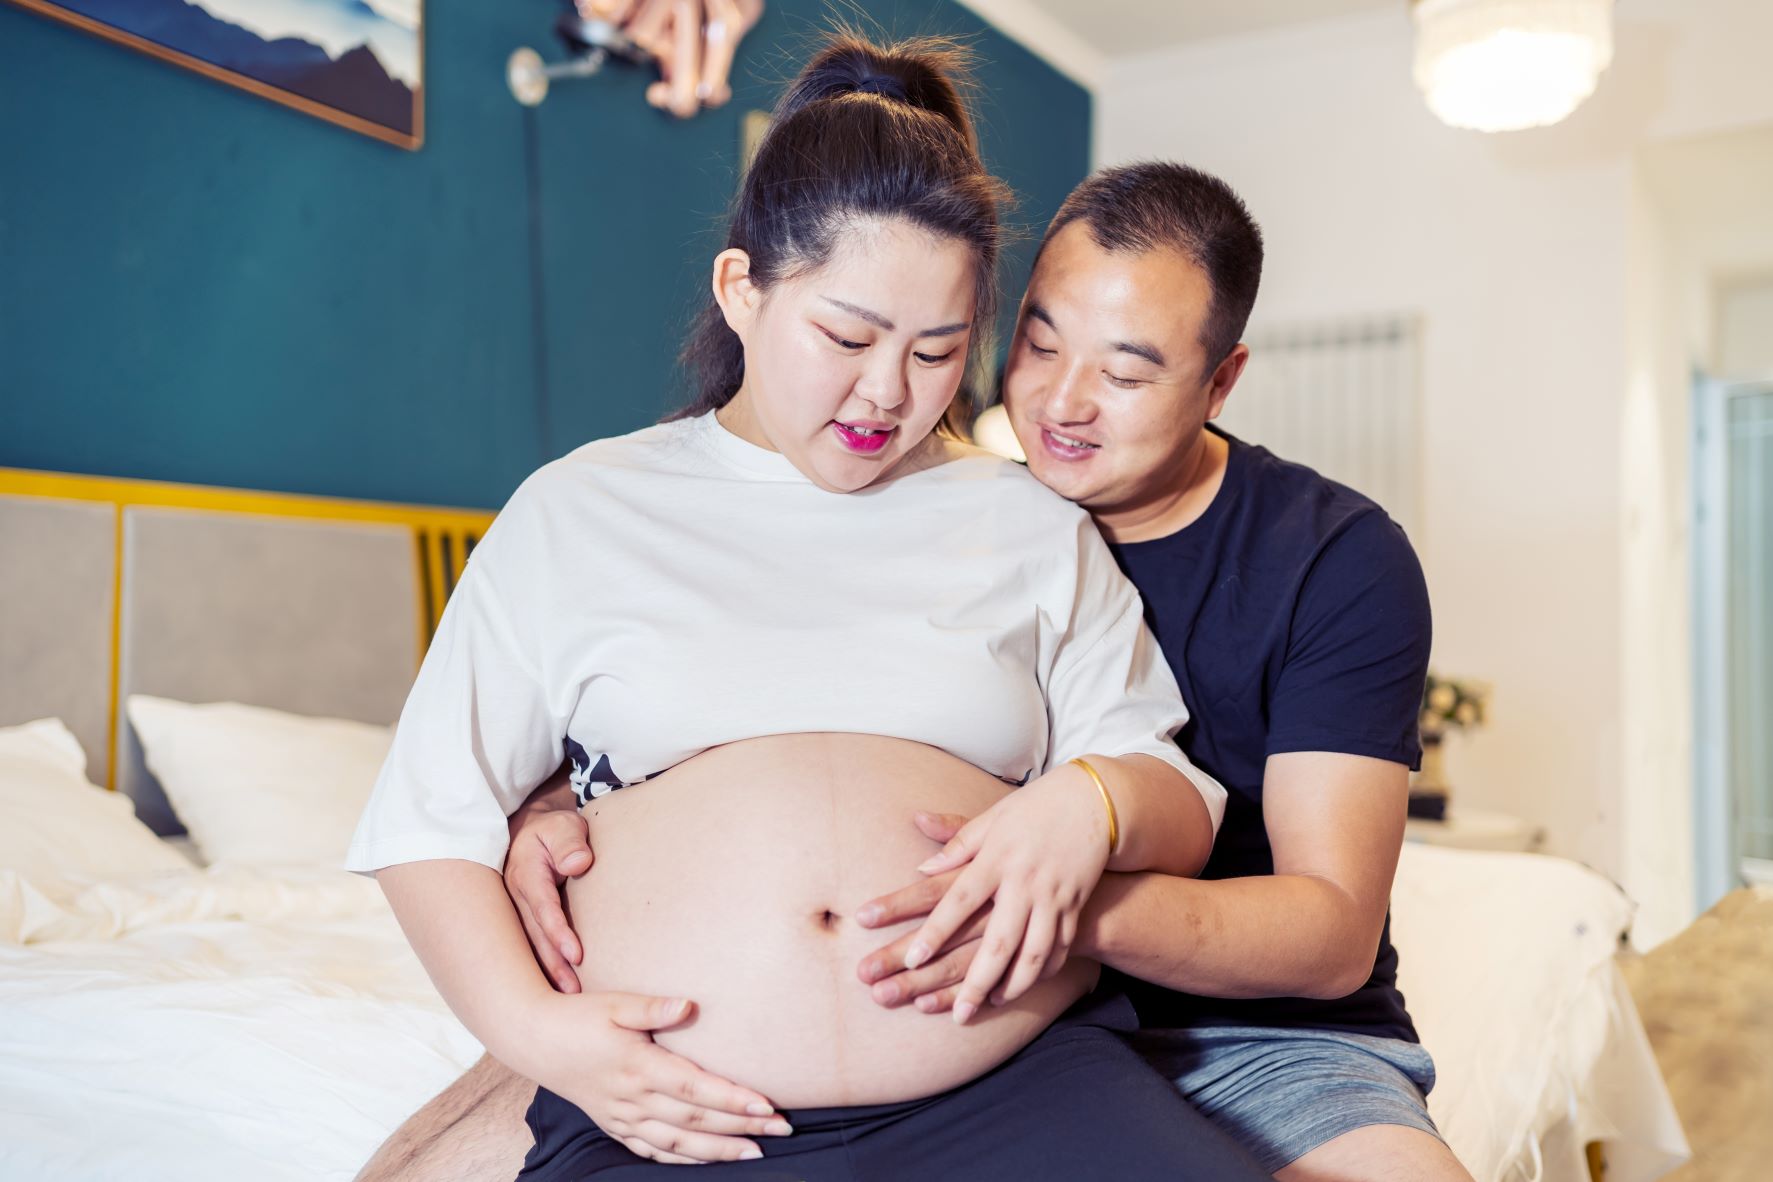 Pregnant woman being held by male partner